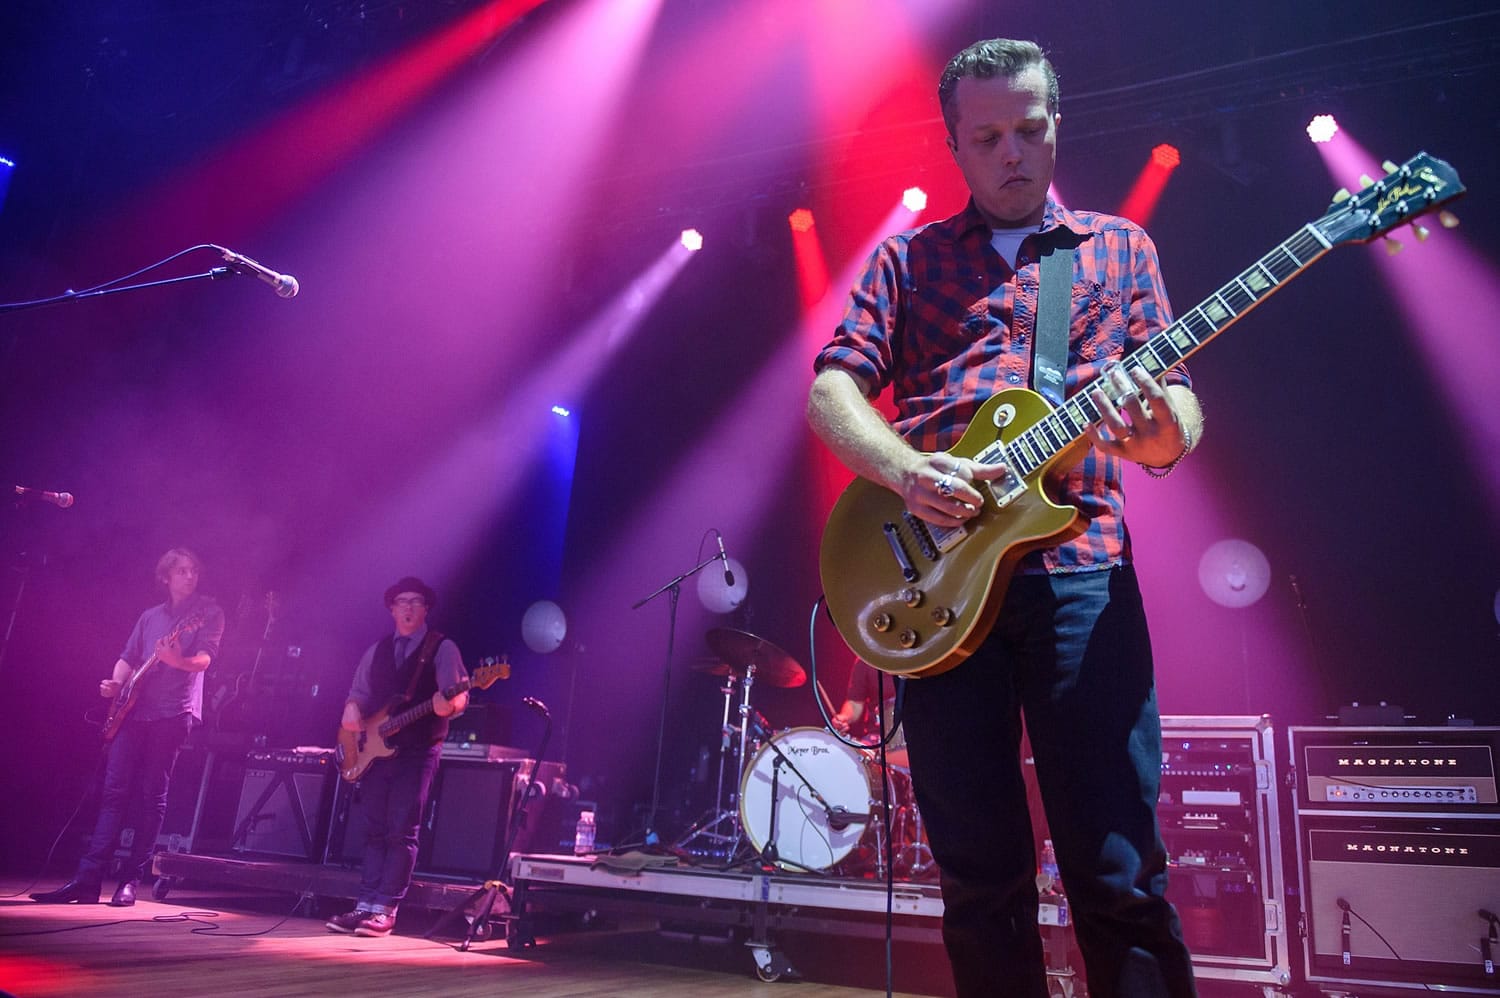 Jason Isbell performs July 26 at Merriweather Post Pavilion in Columbia, Md.